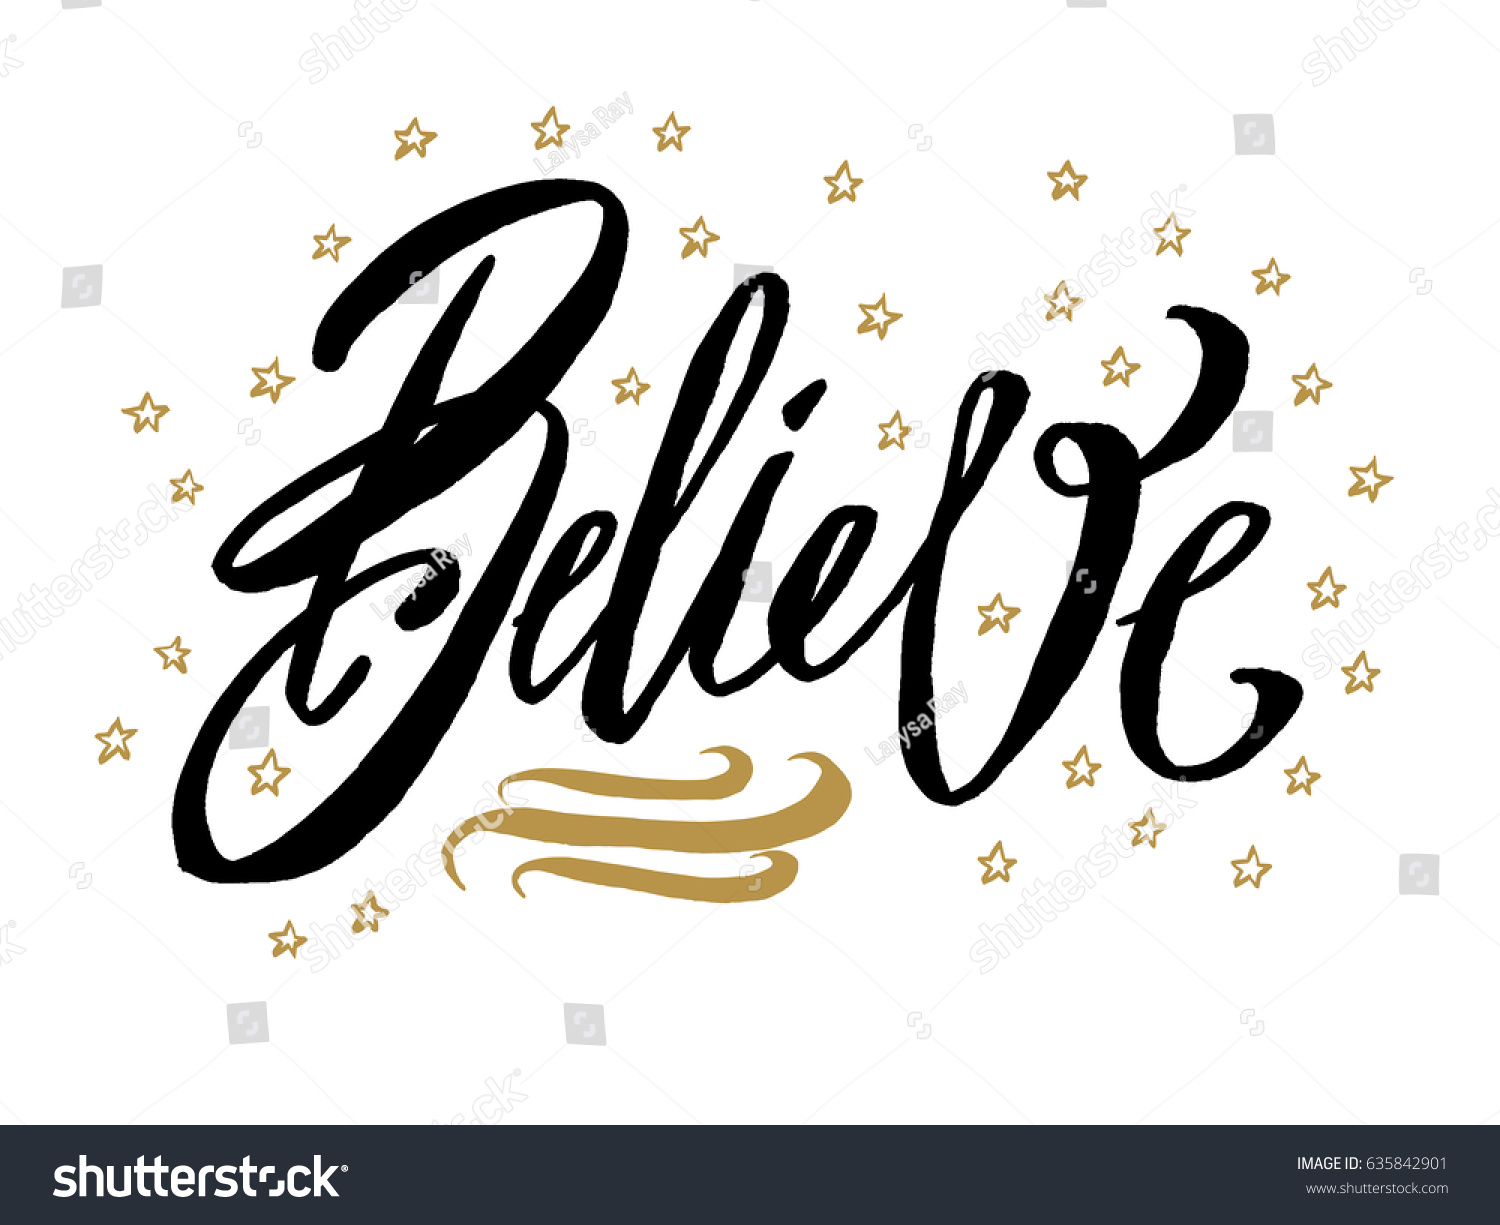 Believe Beautiful Greeting Card Scratched Calligraphy Stock Vector